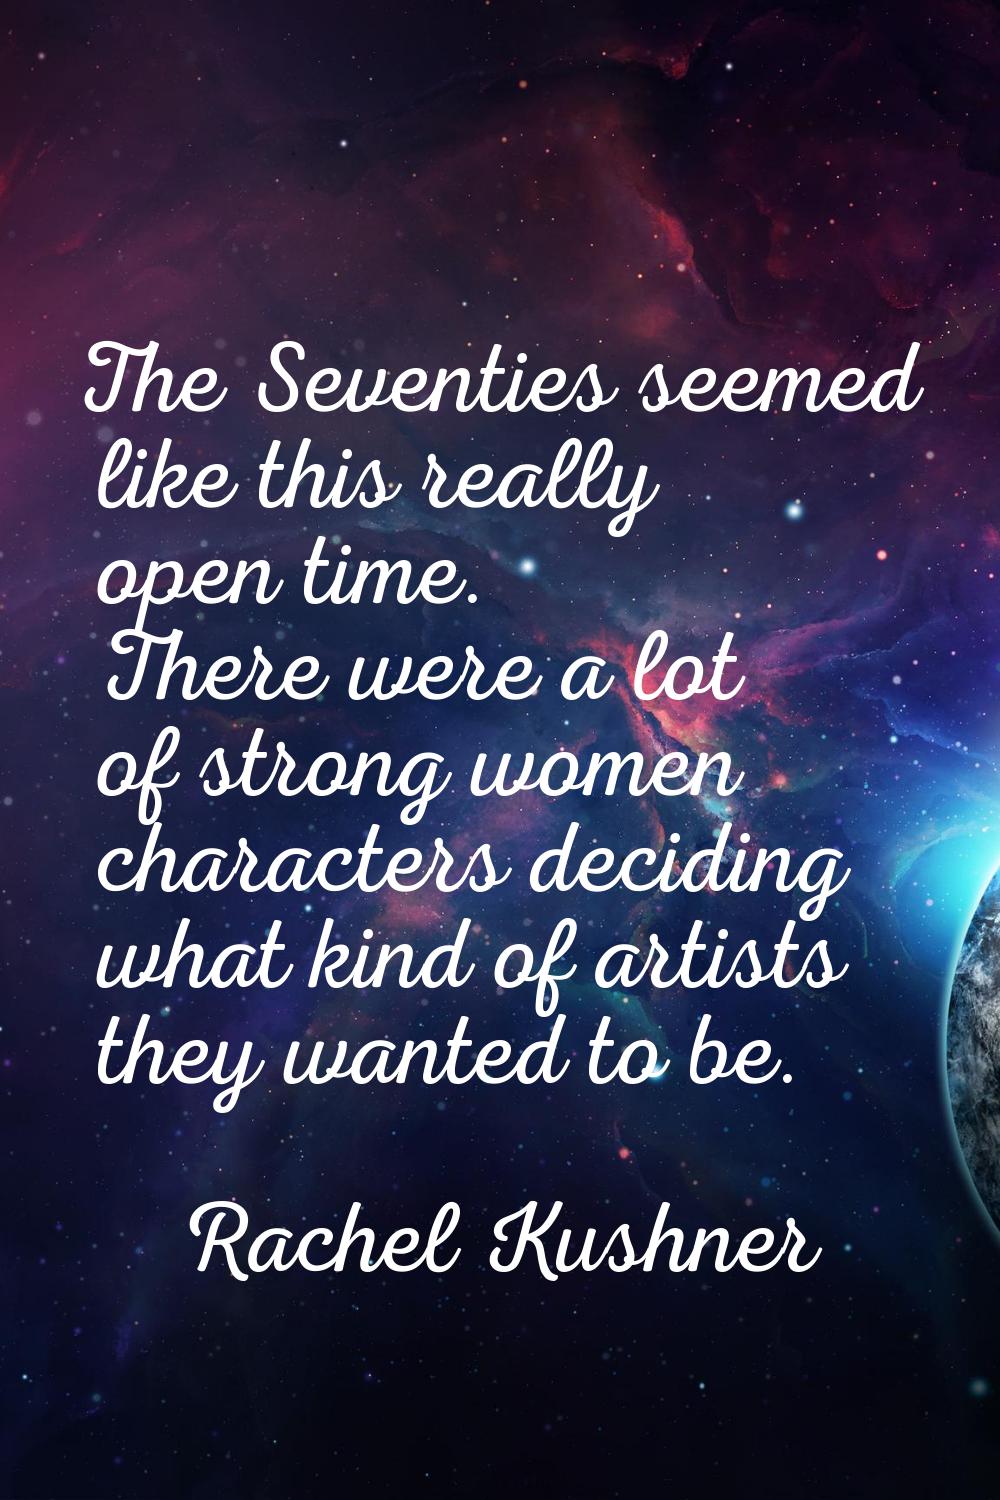 The Seventies seemed like this really open time. There were a lot of strong women characters decidi